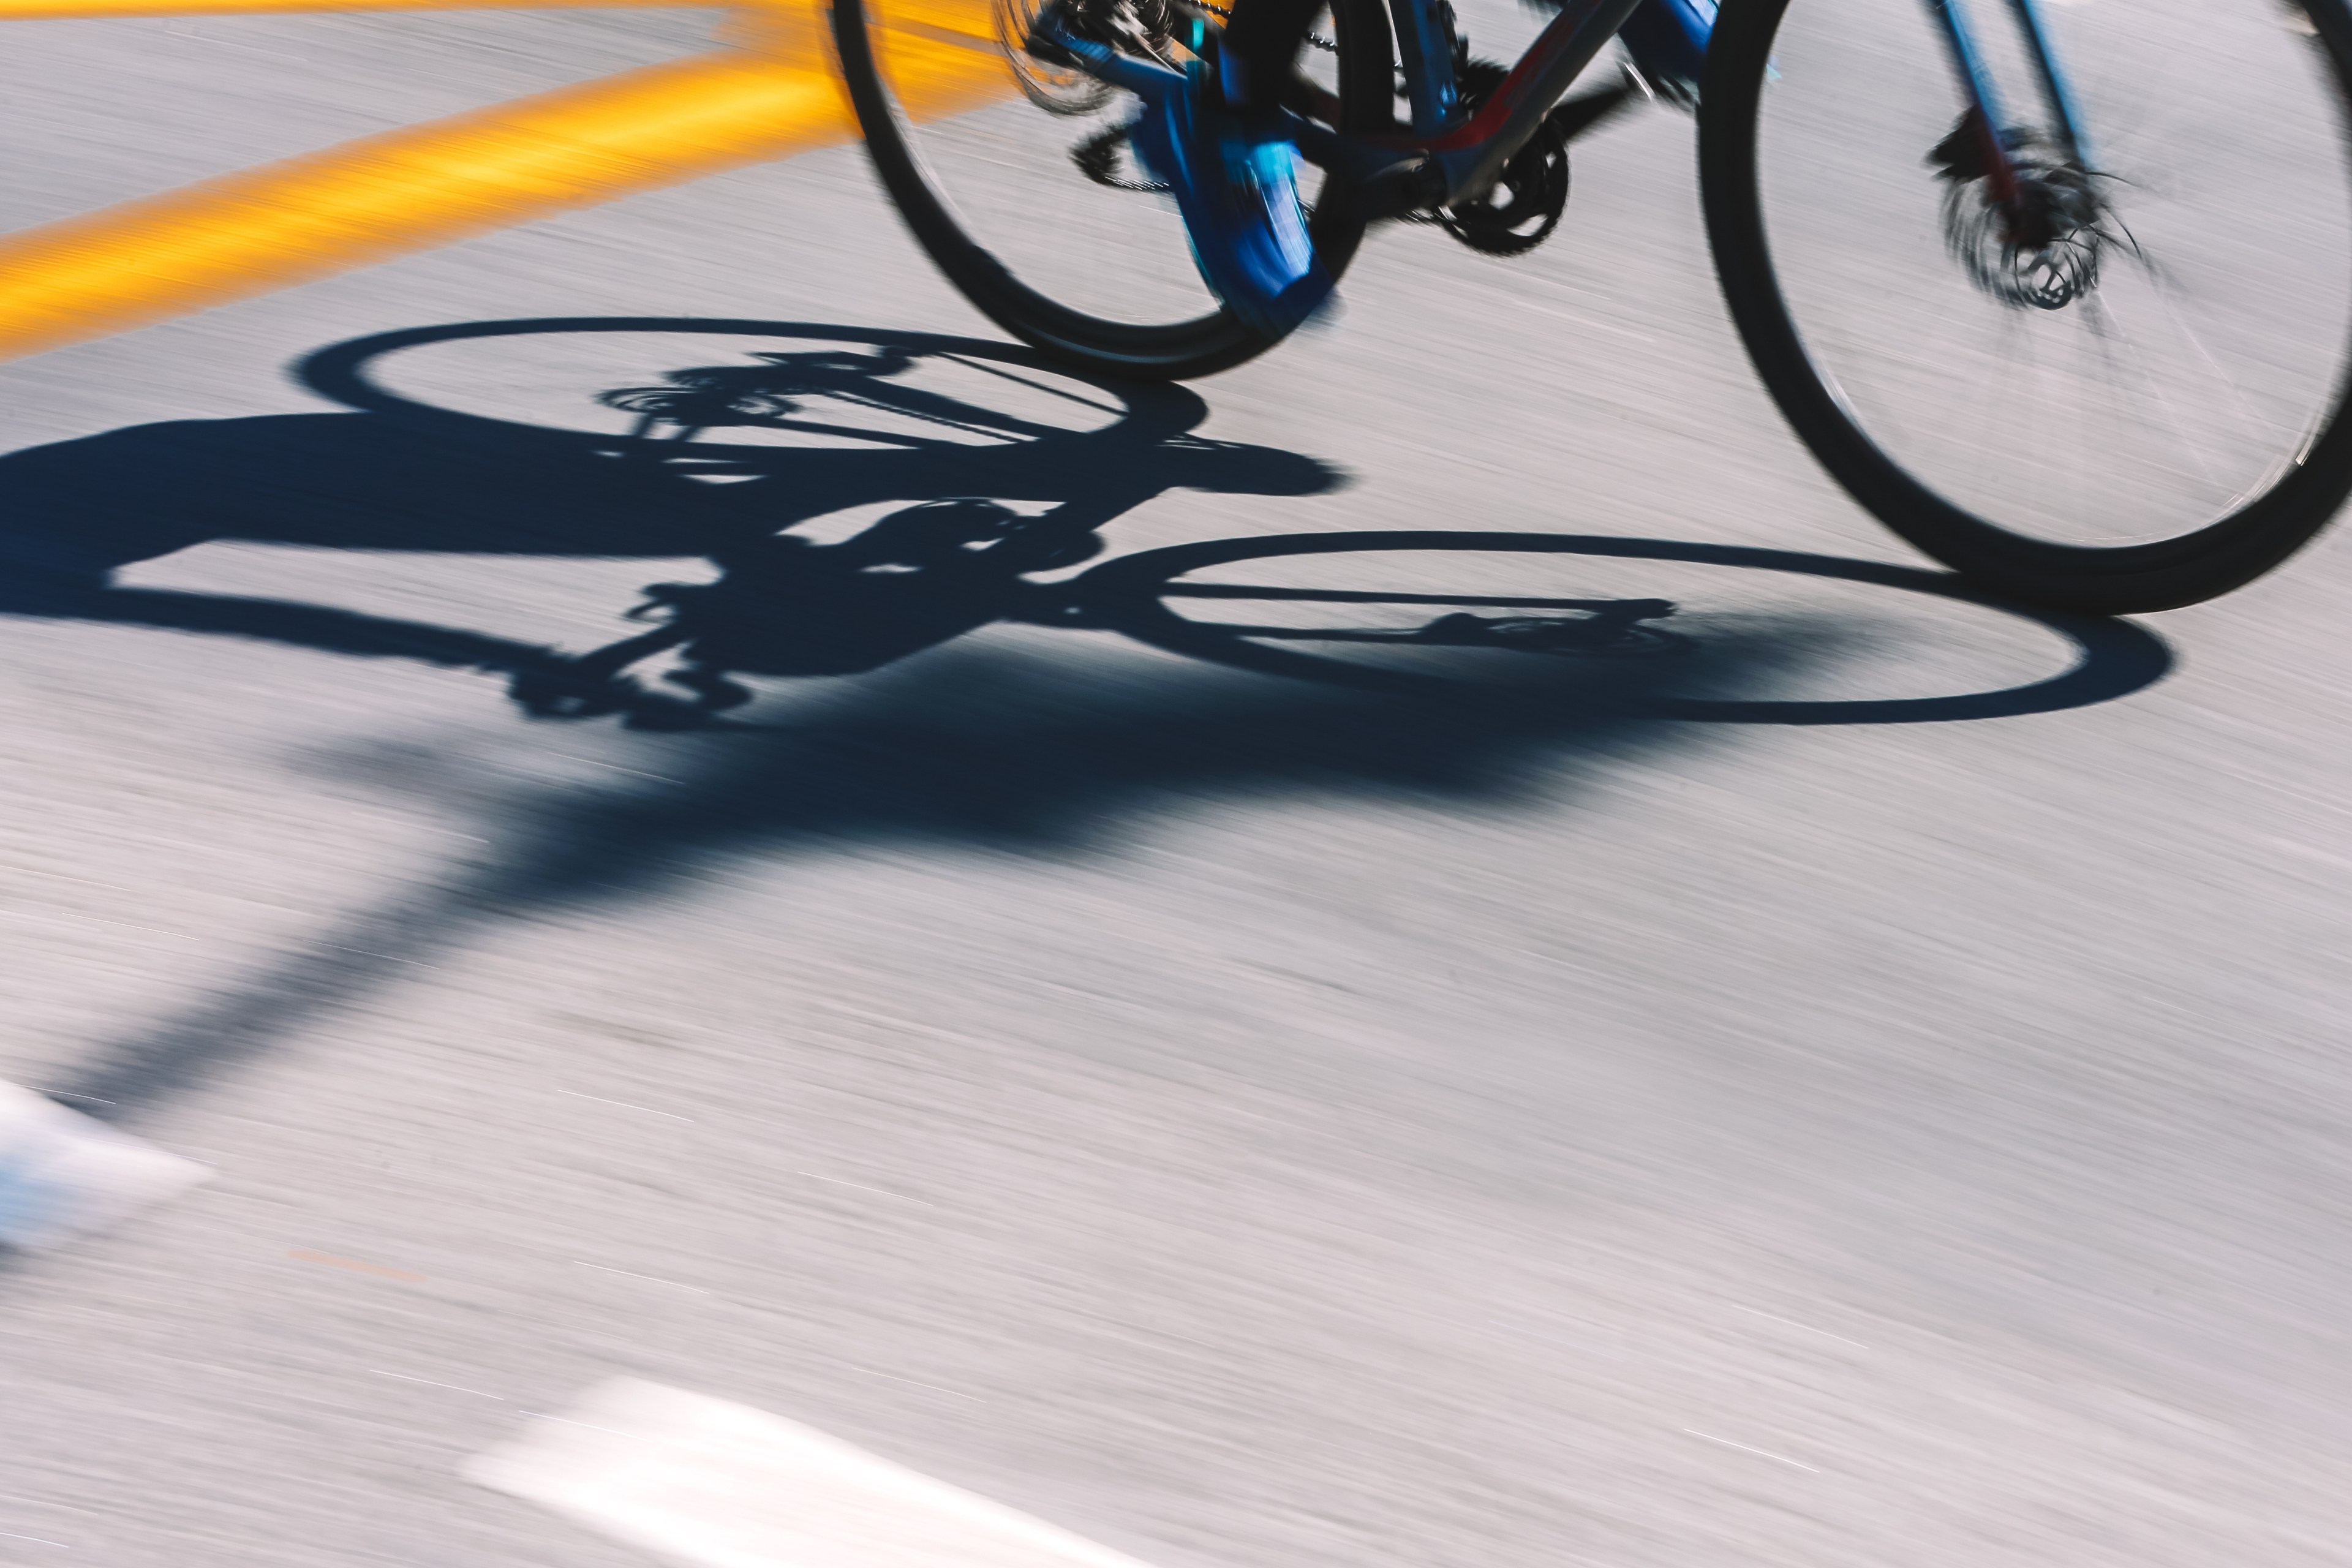 The image shows a blurred close-up of a bicycle in motion on a road, casting a shadow. The shadow and bike wheels create dynamic lines on the surface.